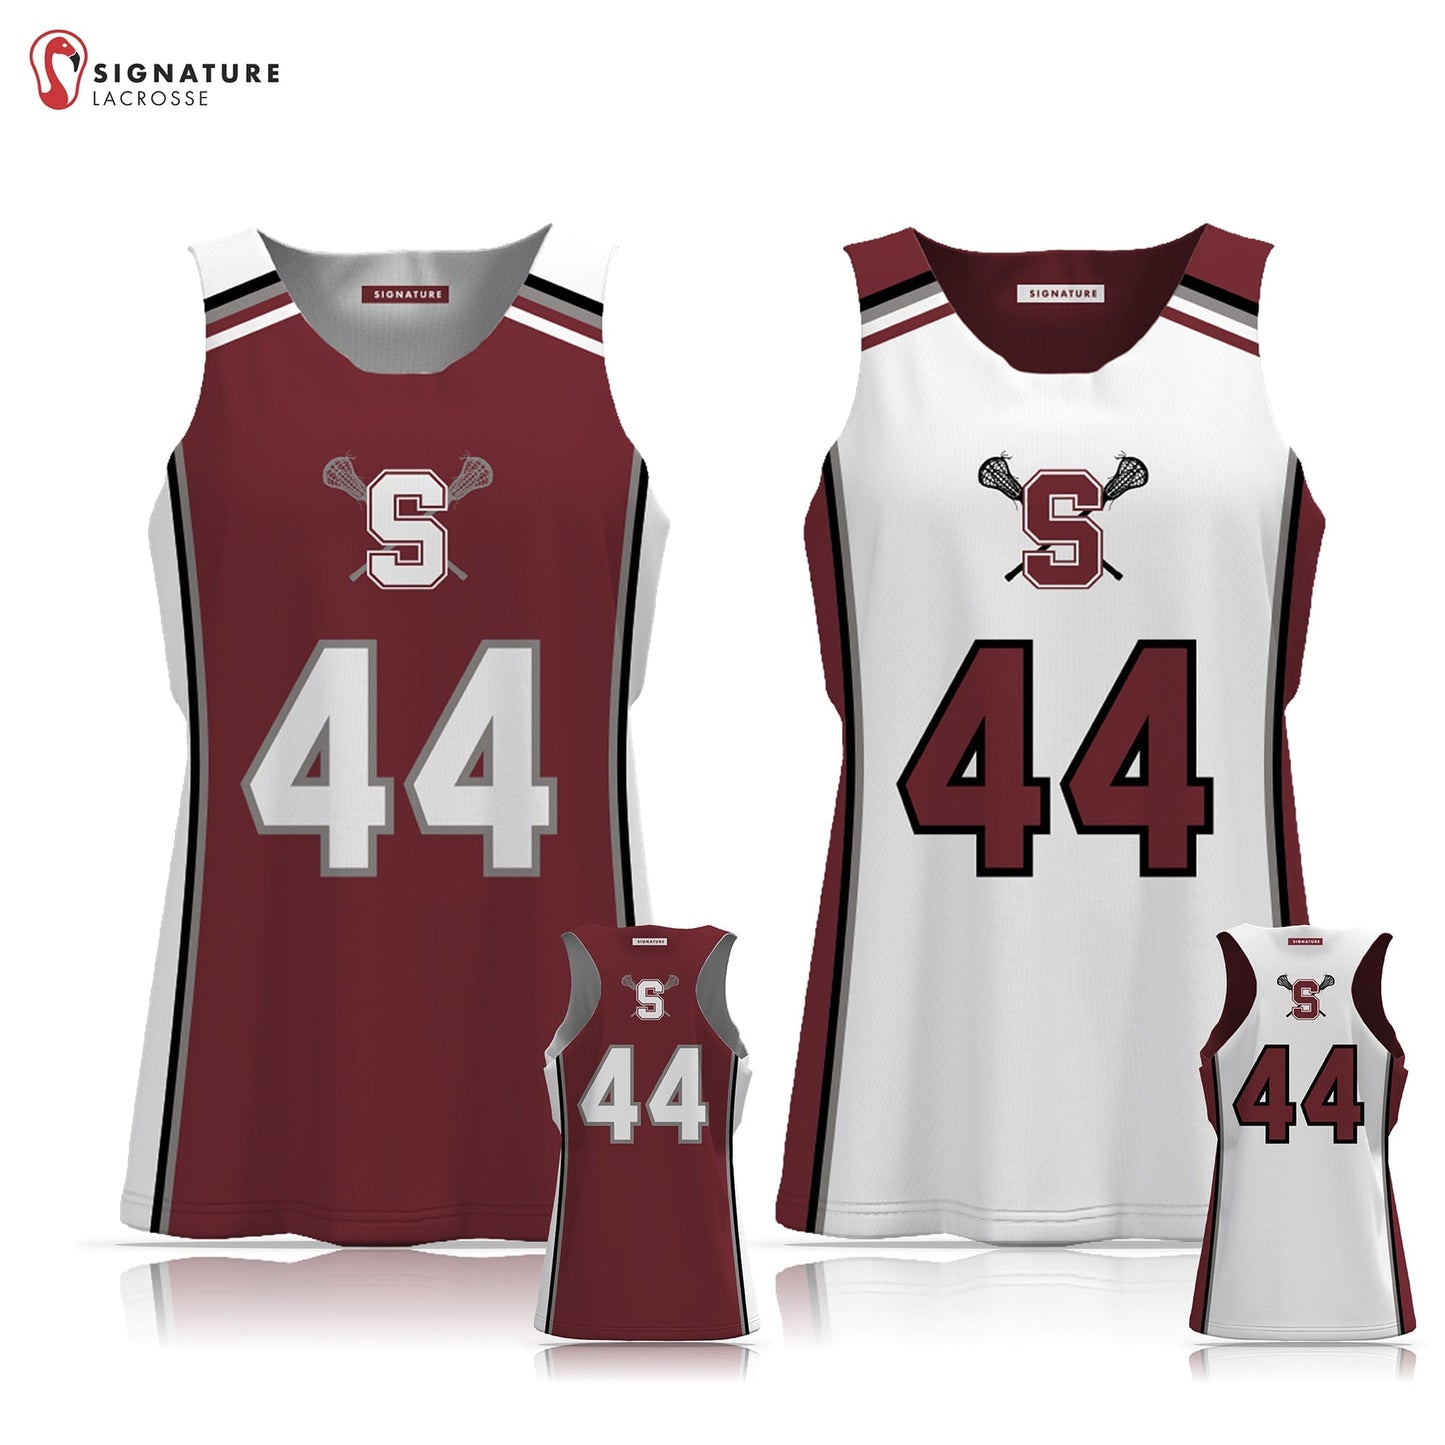 State College Women's Player Reversible Game Pinnie: 7-8 Signature Lacrosse